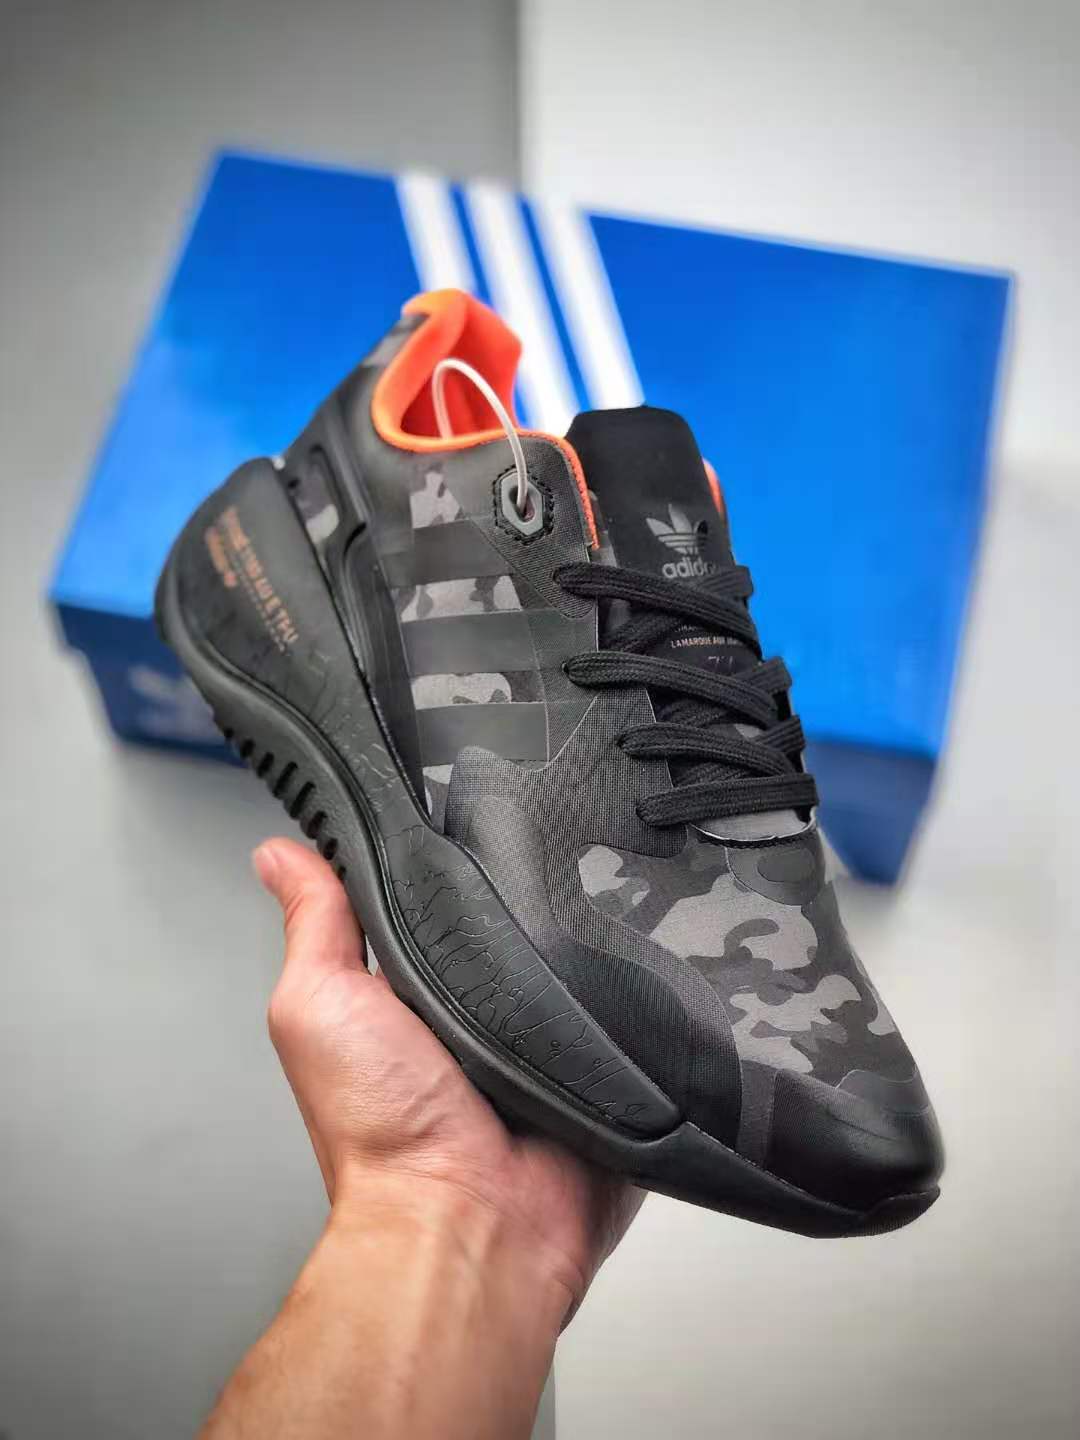 Adidas Originals ZX Alkyne GZ8913 - Shop the Latest Sneakers